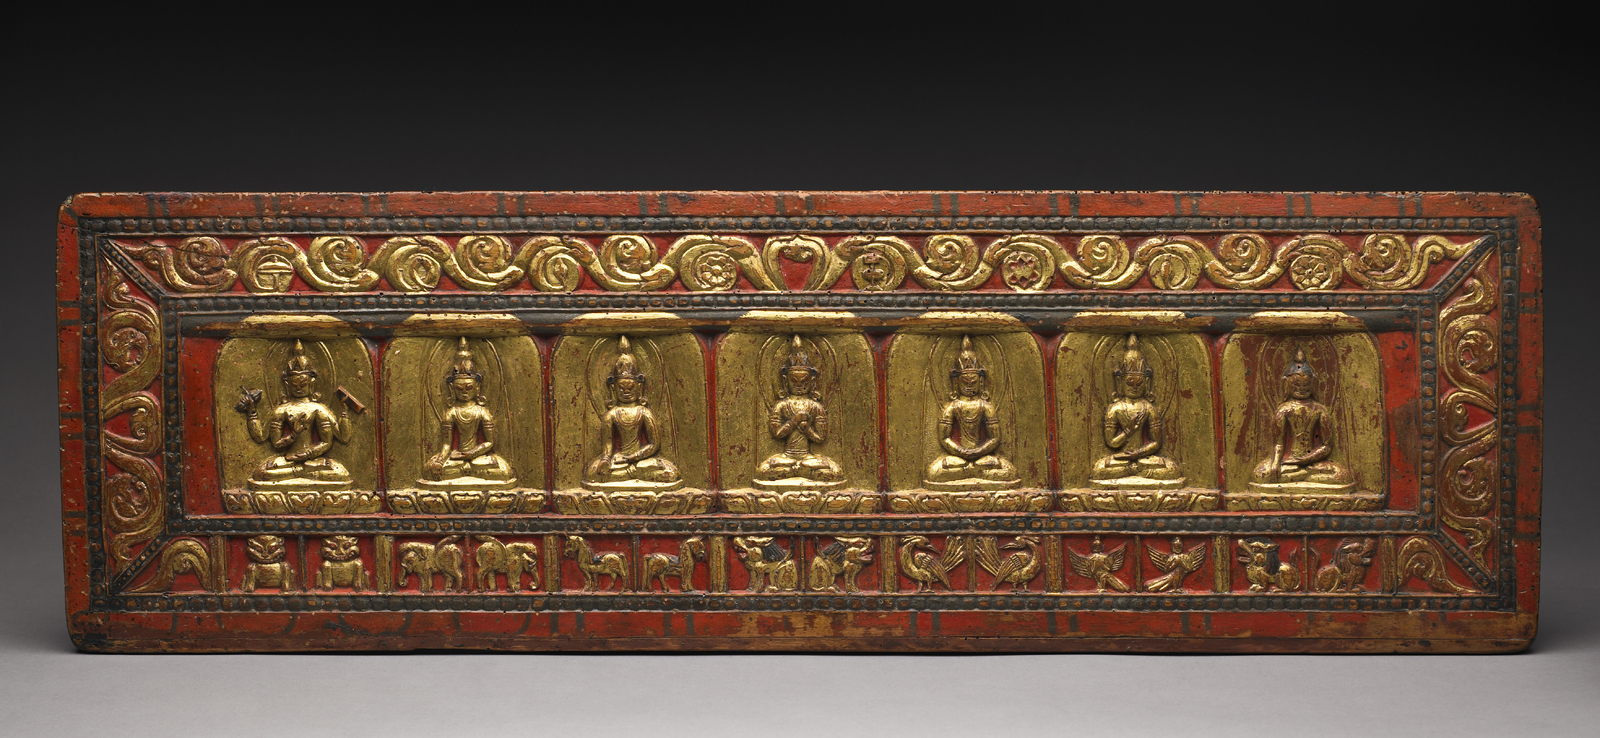 Image credit: Tibetan, “Manuscript Cover,” 12th Century, Museum purchase, gift of Dr. and Mrs. David A. Cofrin with additional funds provided by the Robert H. and Kathleen M Axline acquisition Endowment